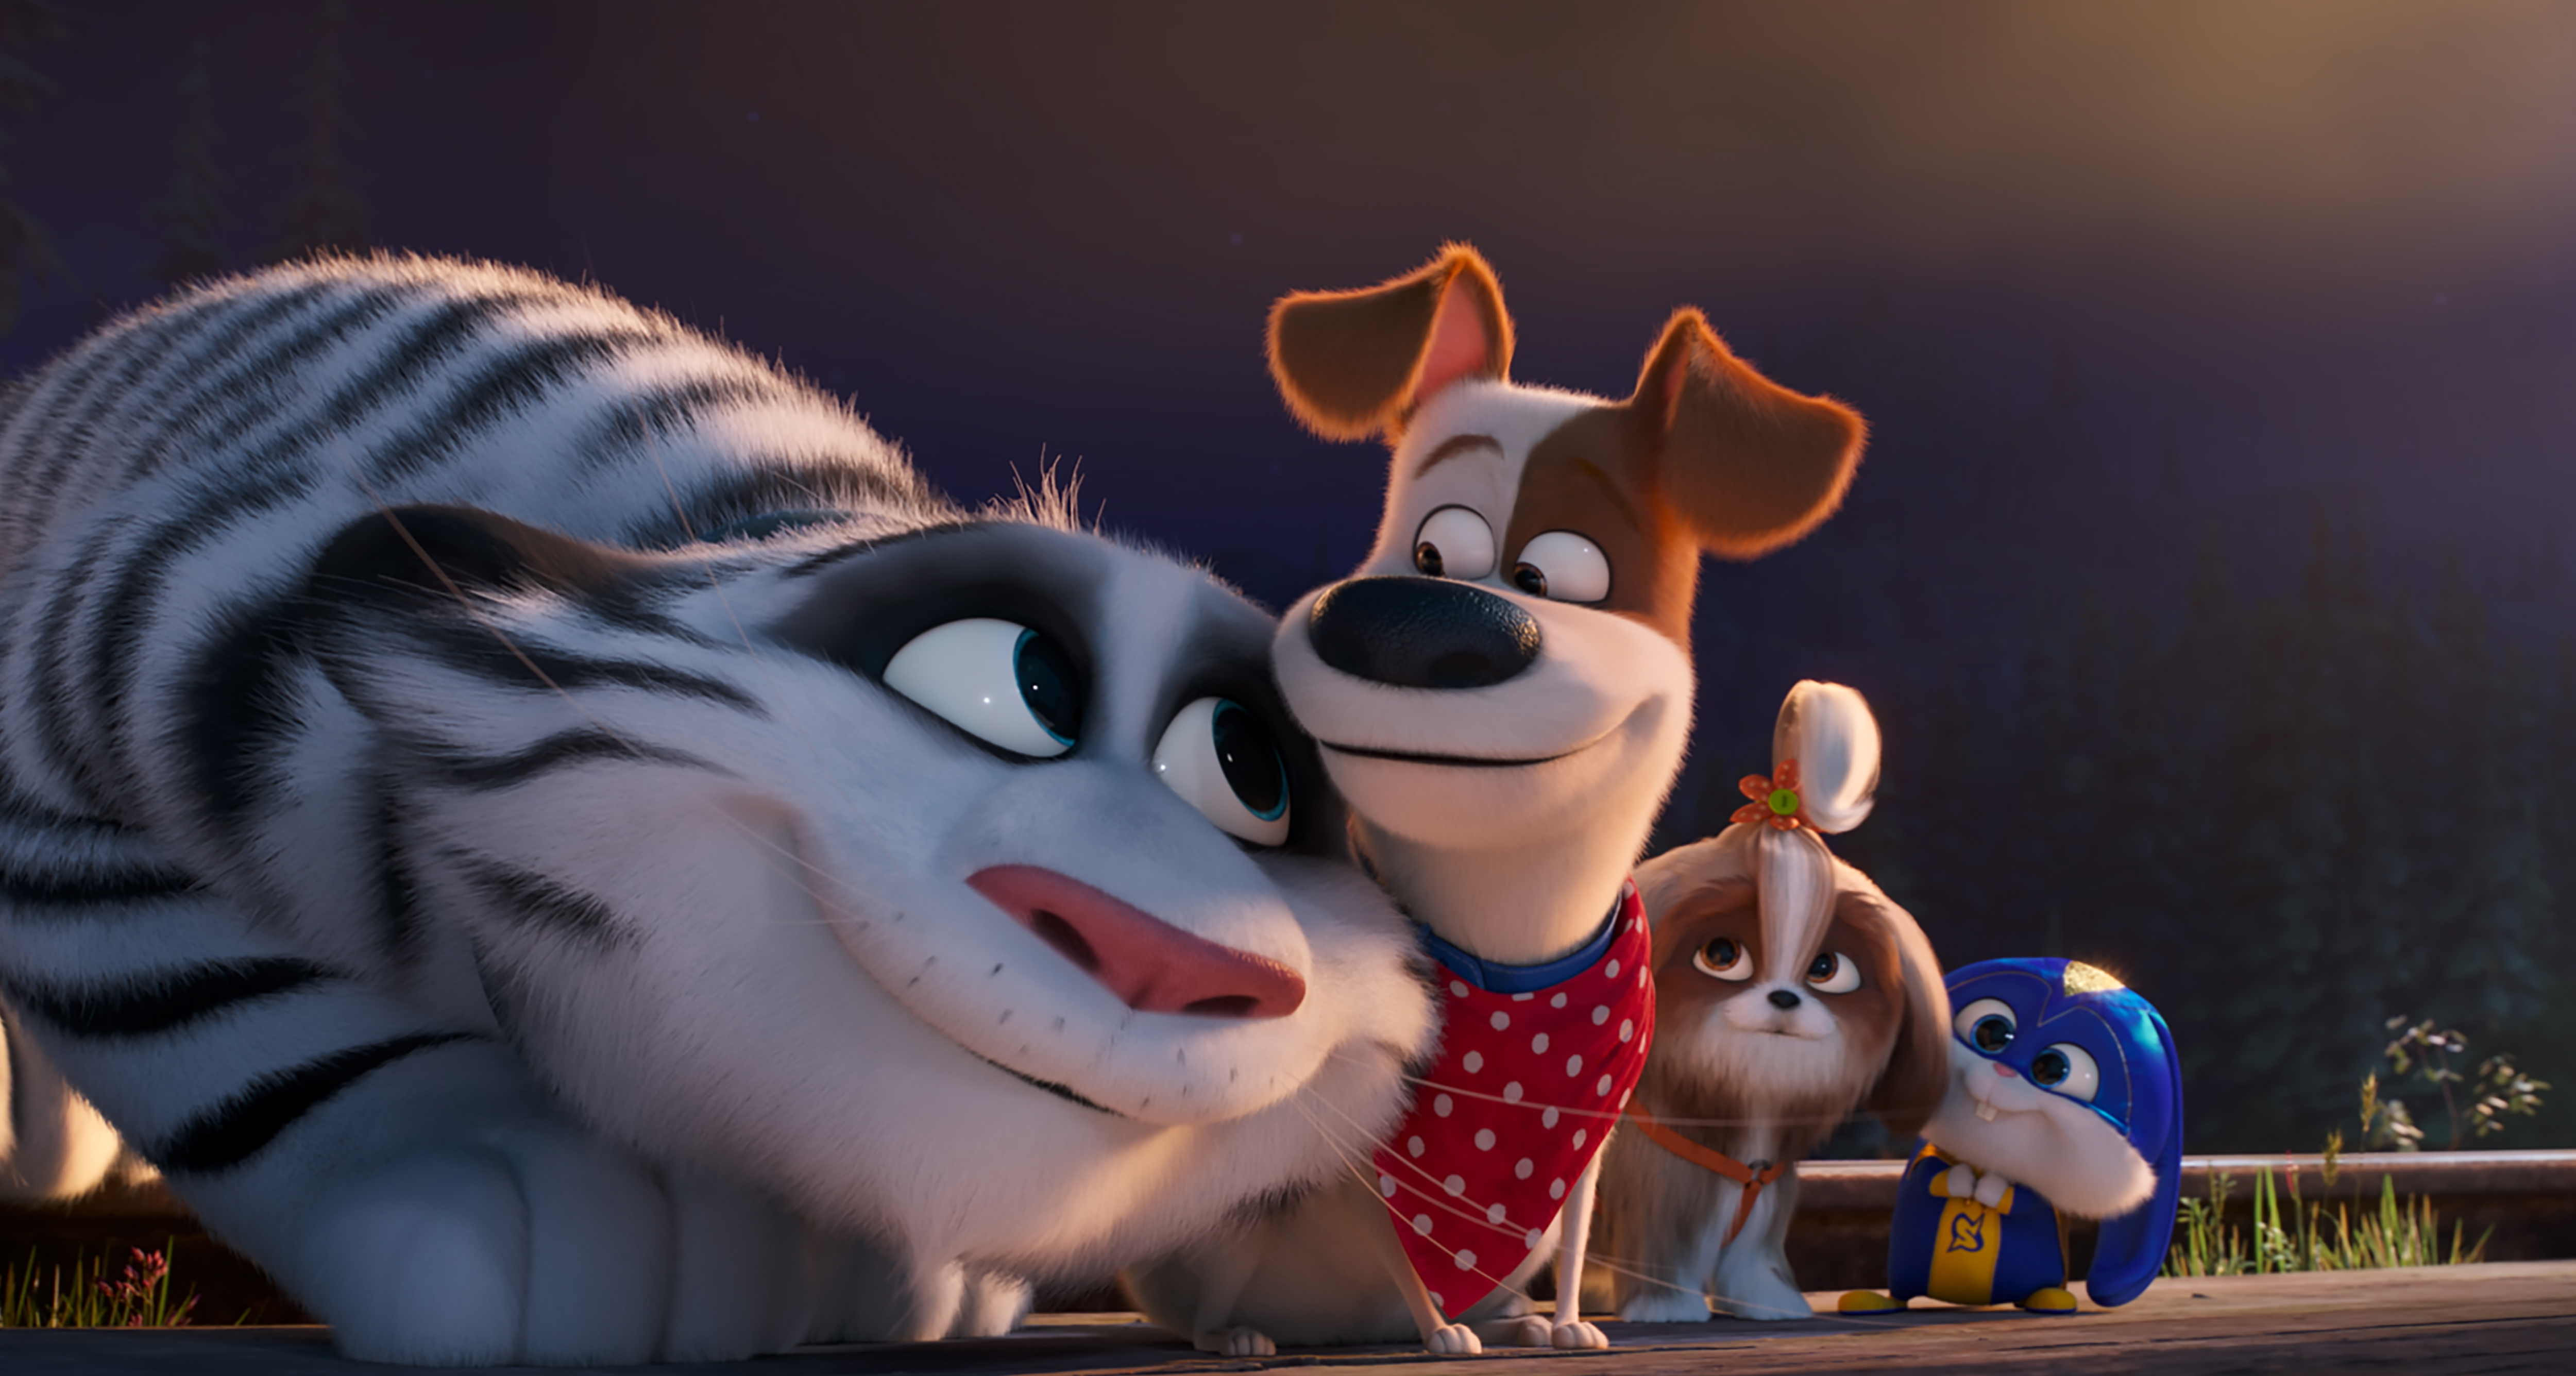 Movie The Secret Life of Pets 2 HD Wallpaper | Background Image